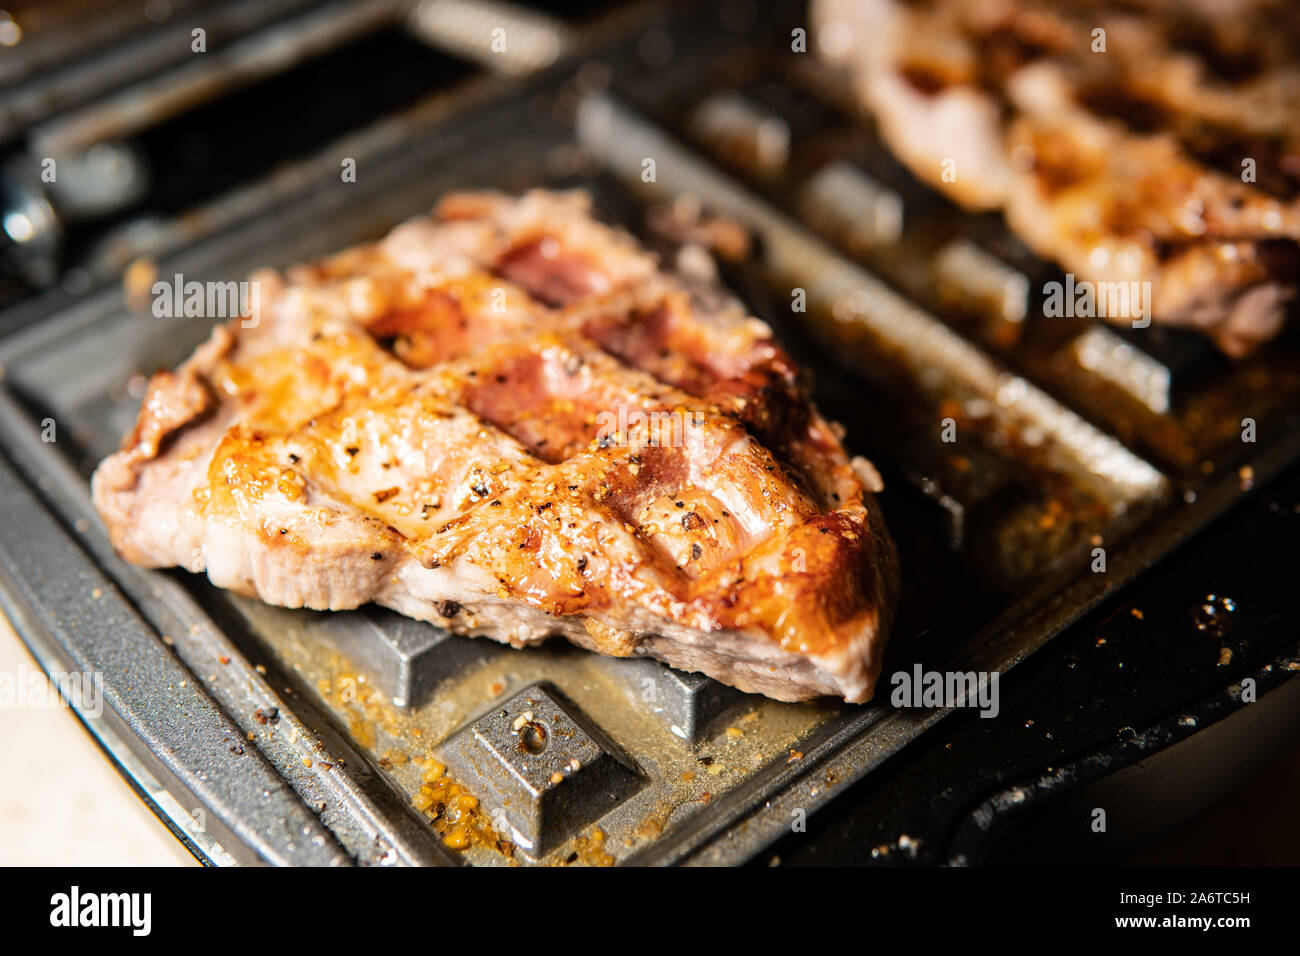 We cook at home barbecue, serve food, glisten grilled meat with fat, cook for the festive table, roast pork Stock Photo